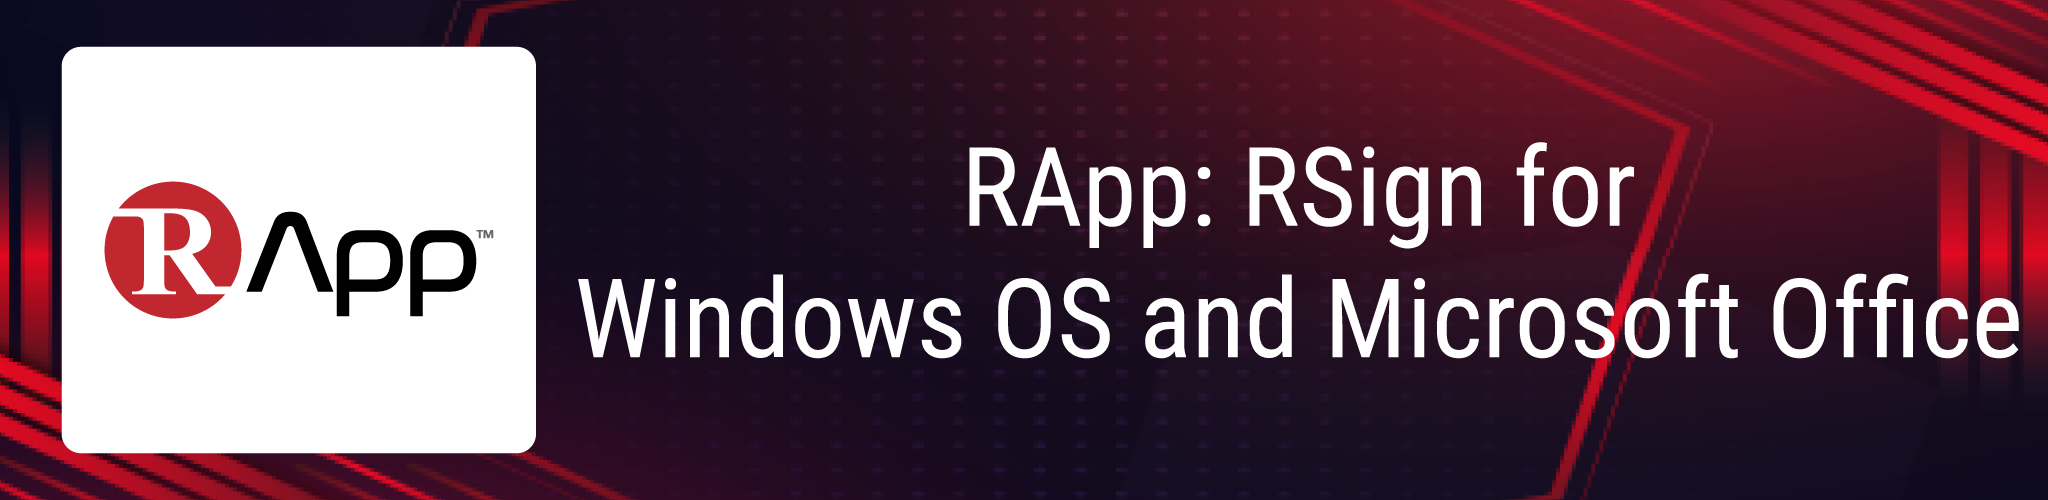 RApp: RSign application for Windows OS and Microsoft Office